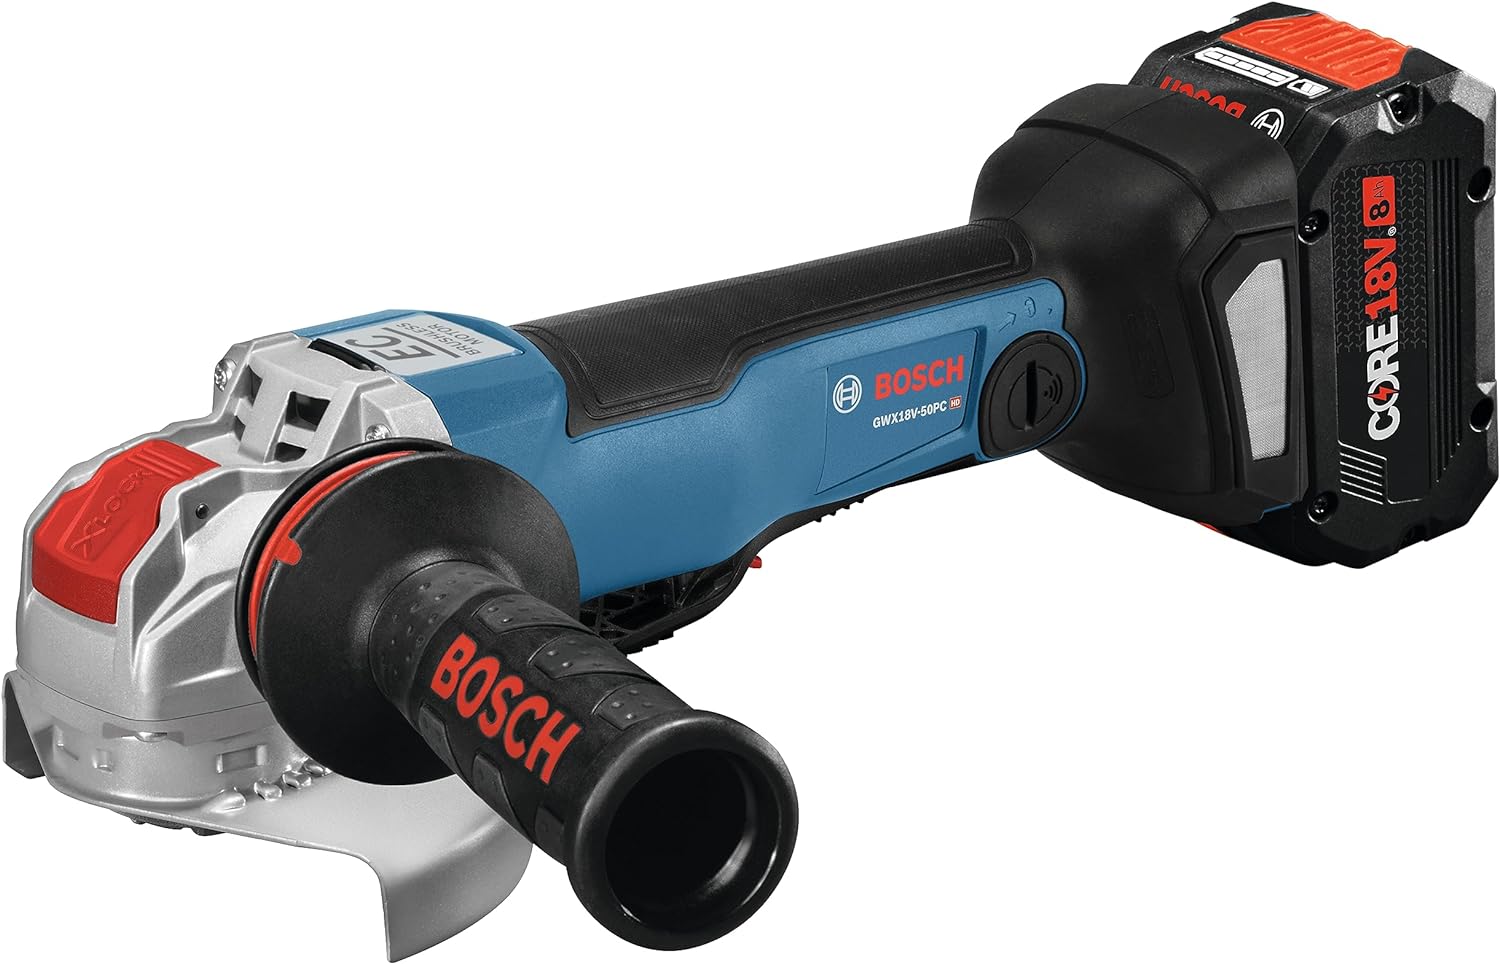 BOSCH GWX18V-50PCN 18V X-LOCK EC Brushless Connected-Ready 4-1/2 In. – 5 In. Angle Grinder with No Lock-On Paddle Switch (Bare Tool), Black,blue,grey